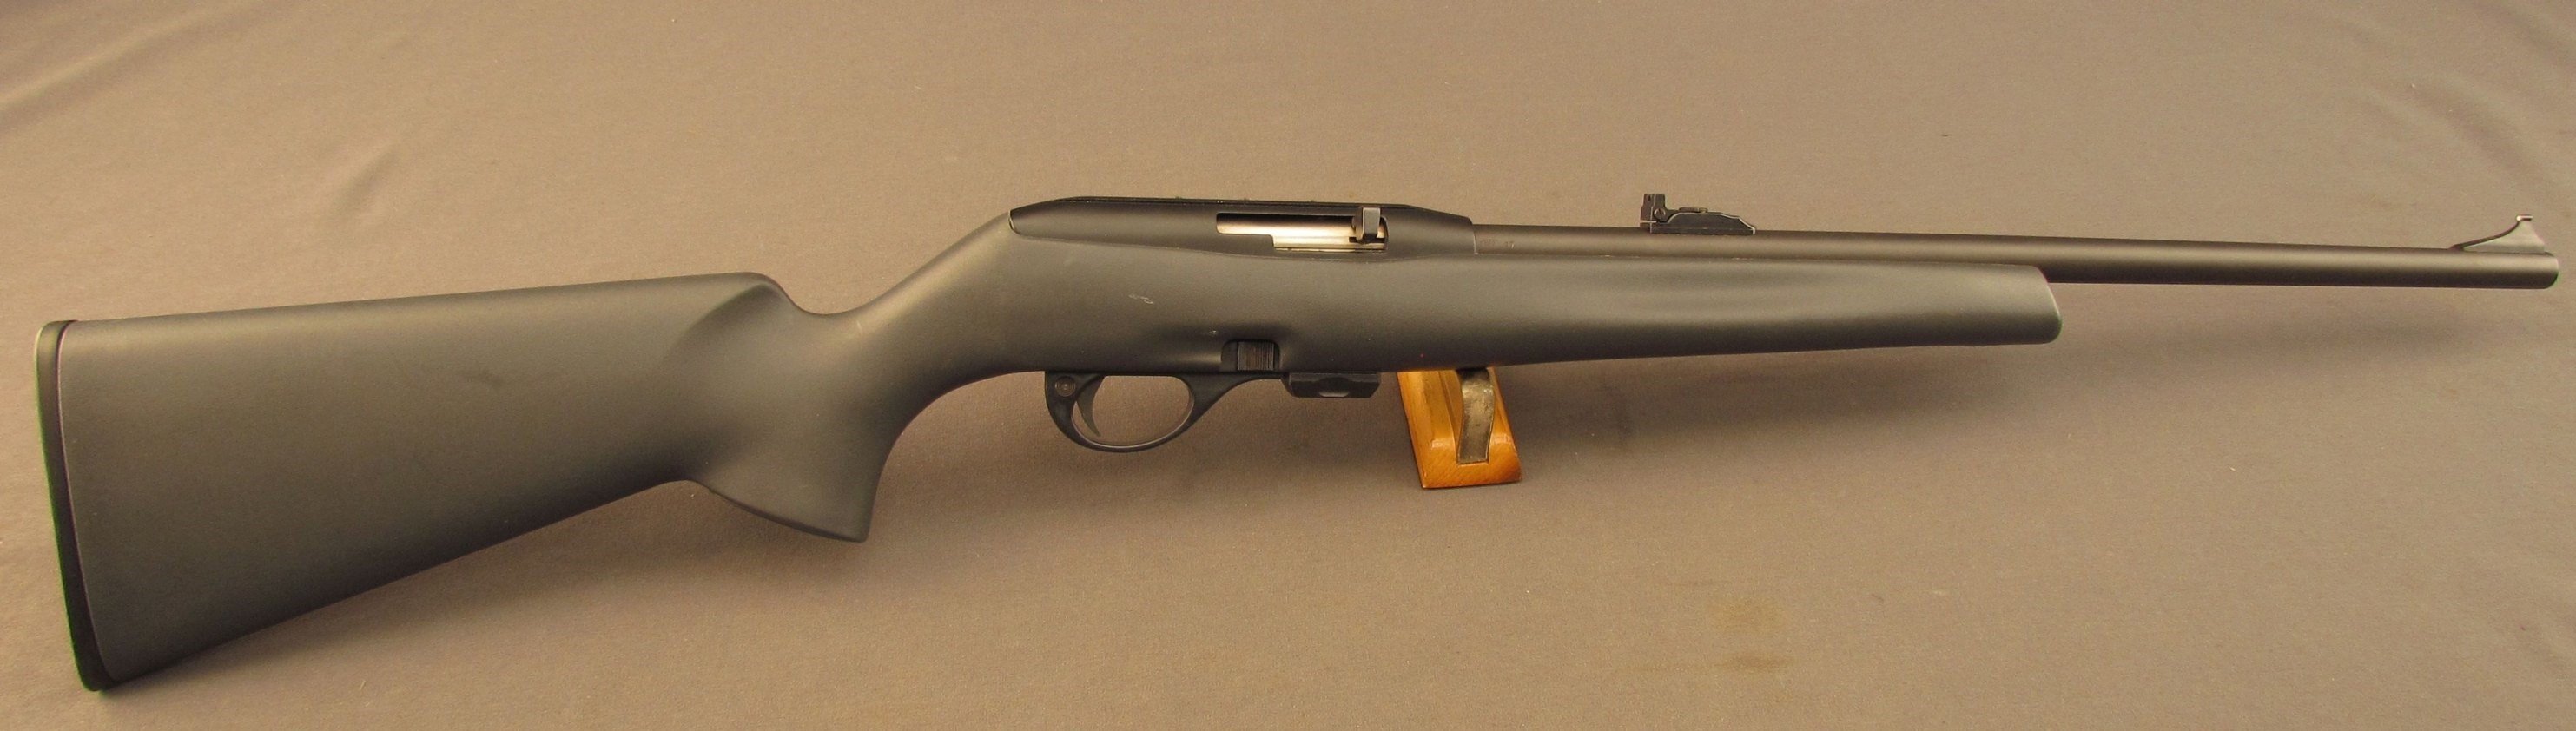 Remington 597 chambered for .22 LR 